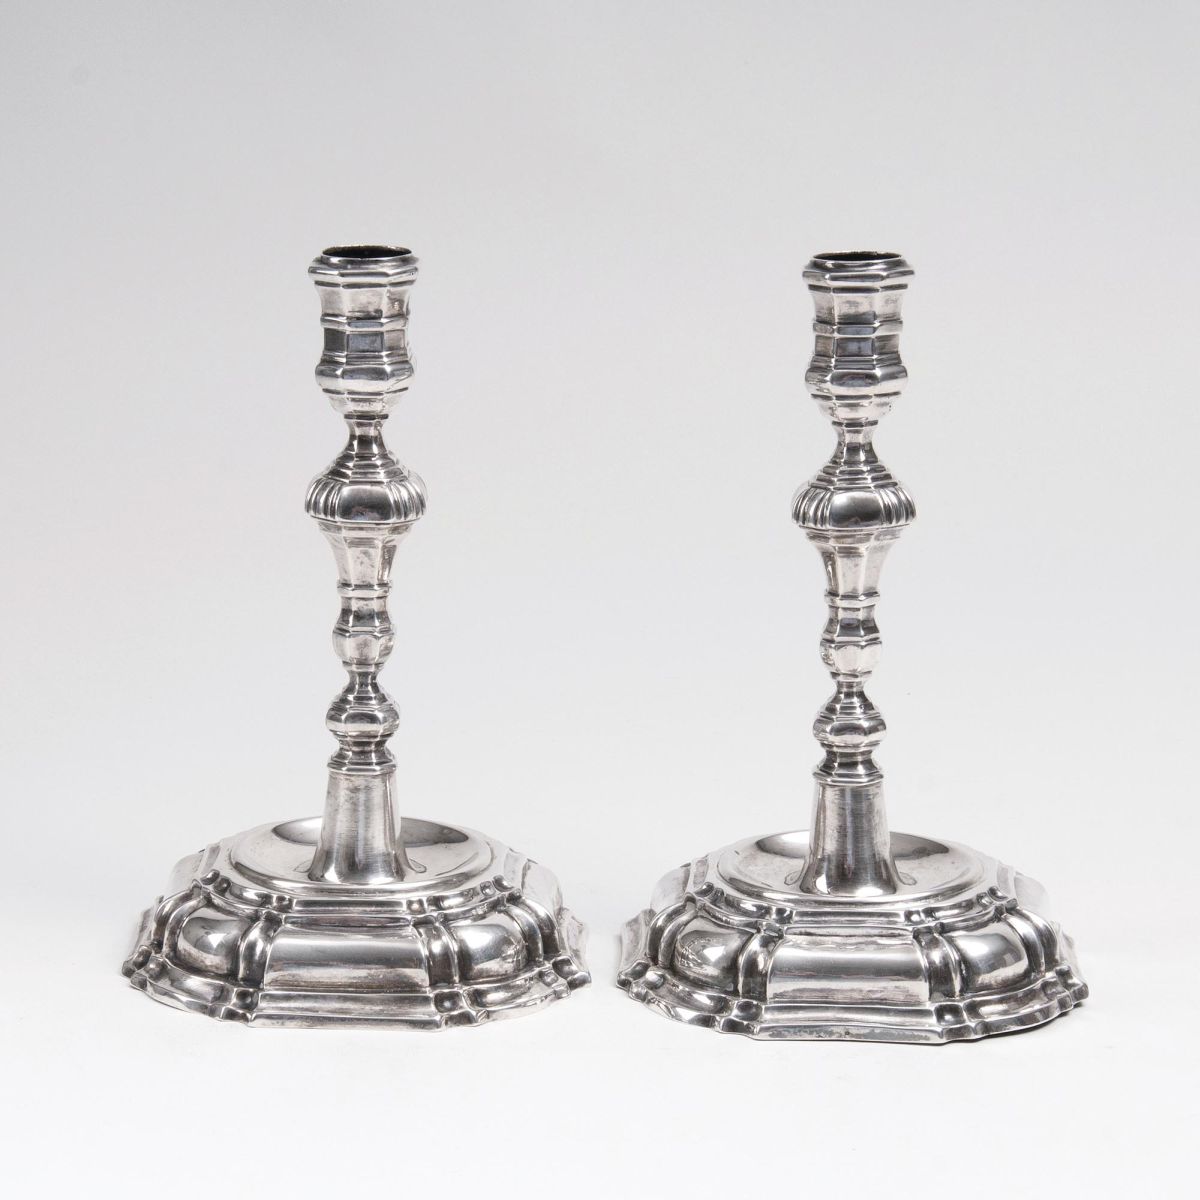 A Pair of Baroque Candle Holders